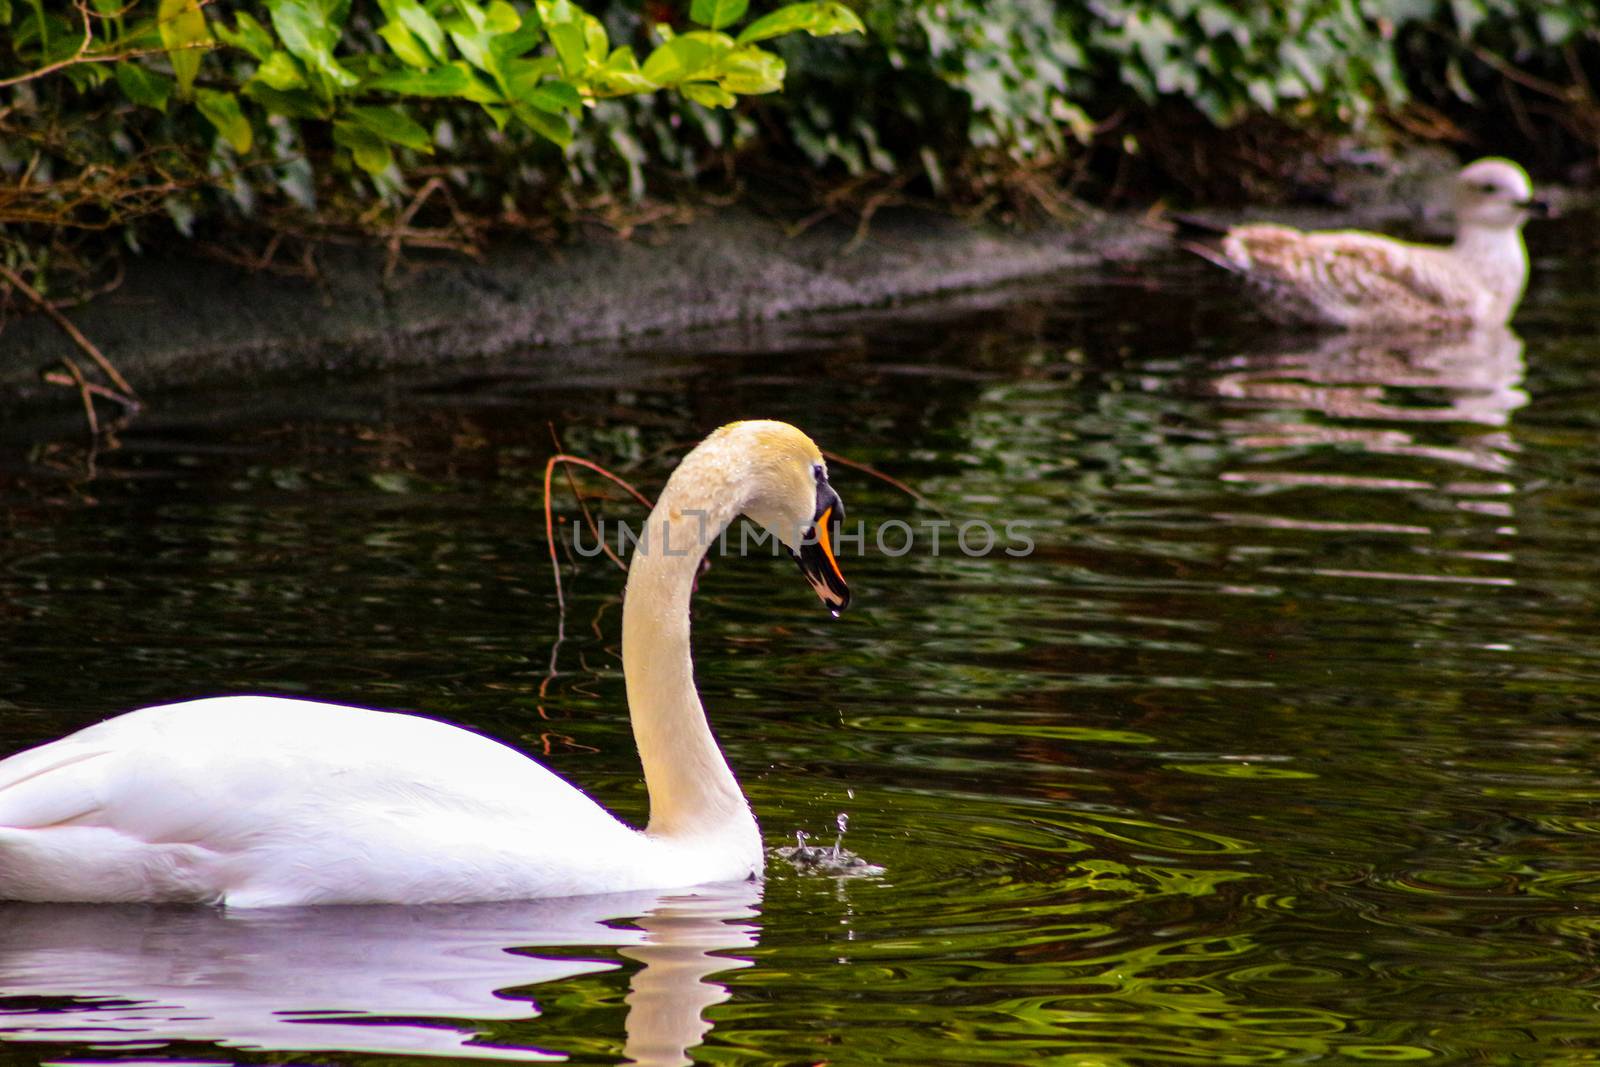 Mute swan cygnets, Cygnus olor, watched over by pen and cob, swimming in Grand Canal, Dublin, Ireland. Four young fluffy baby swans with soft down in water beside mother and father by mynewturtle1